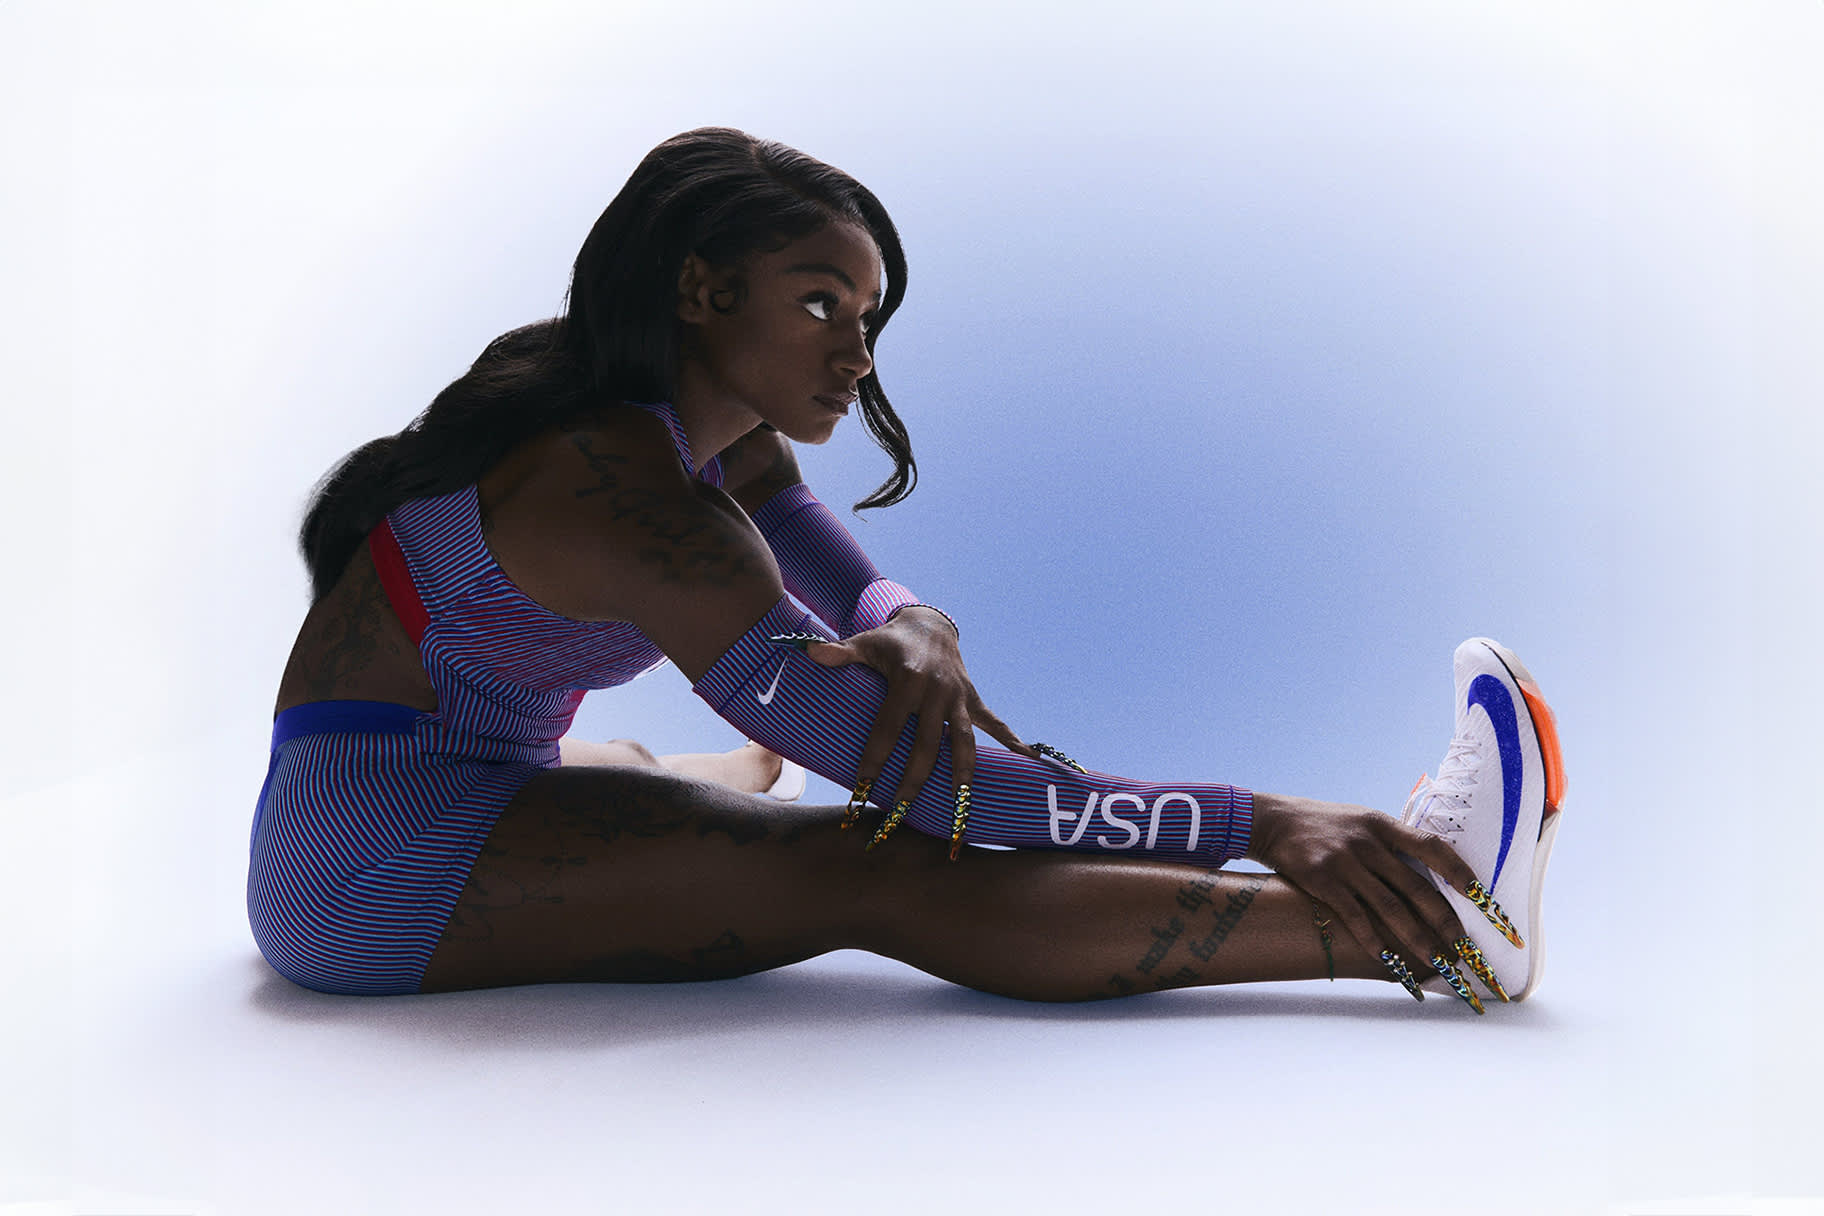 Behind the Scenes: The Creation of Nike Women’s Elite Track and Field Kits 